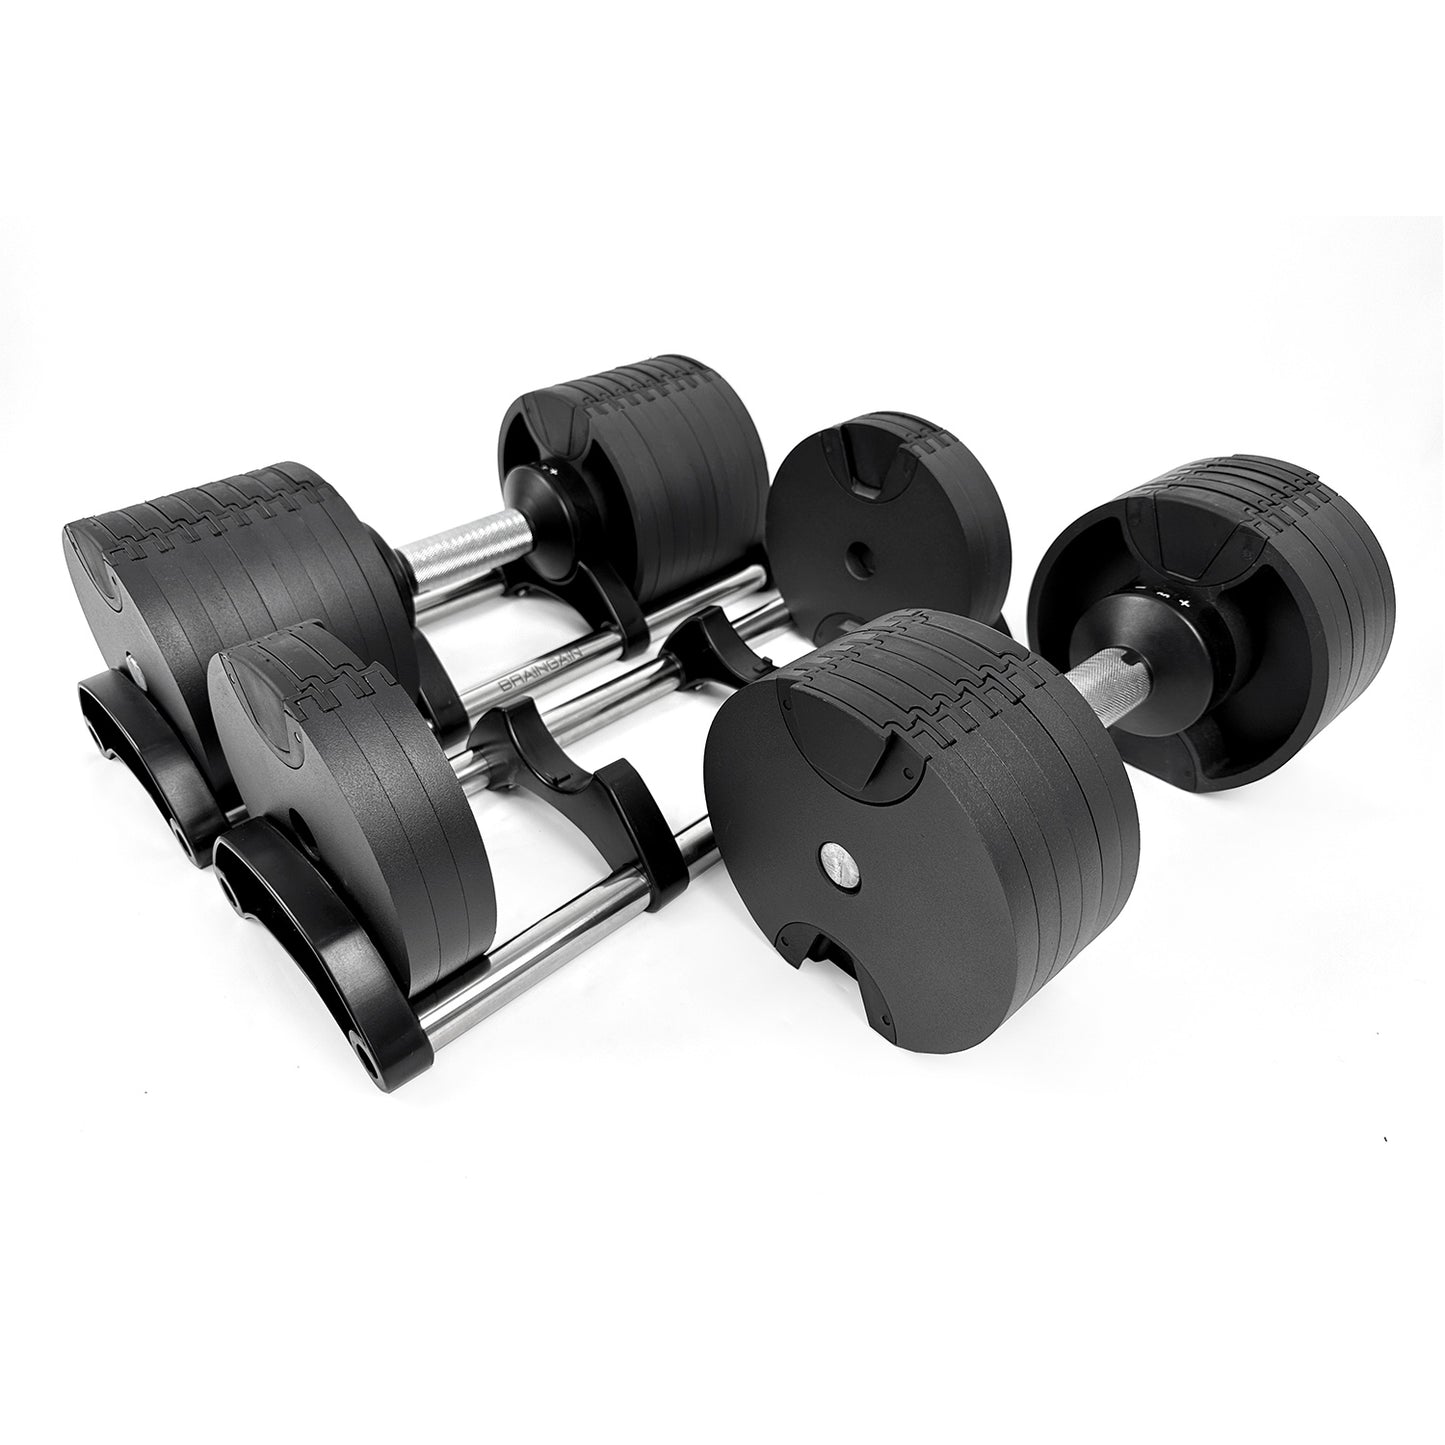 BRAINGAIN 40kg Round Adjustable Dumbbell Action Shot Showing Mechanism Two Units Side by Side